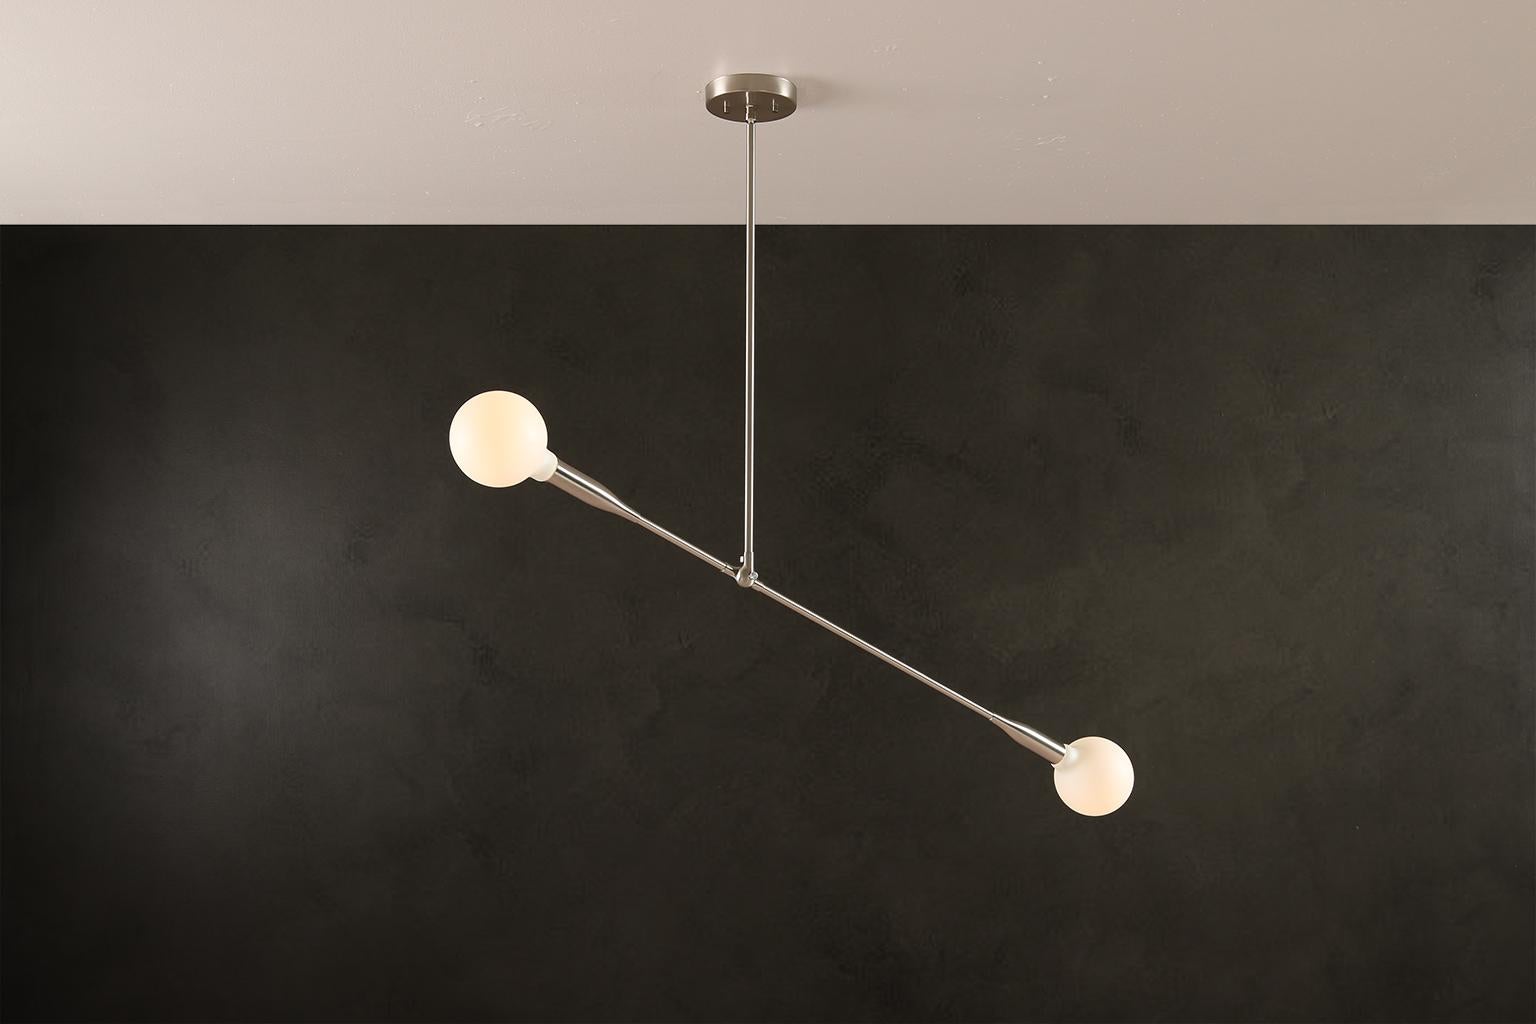 The Sorenthia Light is a modern, linear pendant with bold, elegant lines and dramatic negative space. The custom-made light fixture incorporates an element of the organic in its design language with a long, reaching arm that can be adjusted on site,